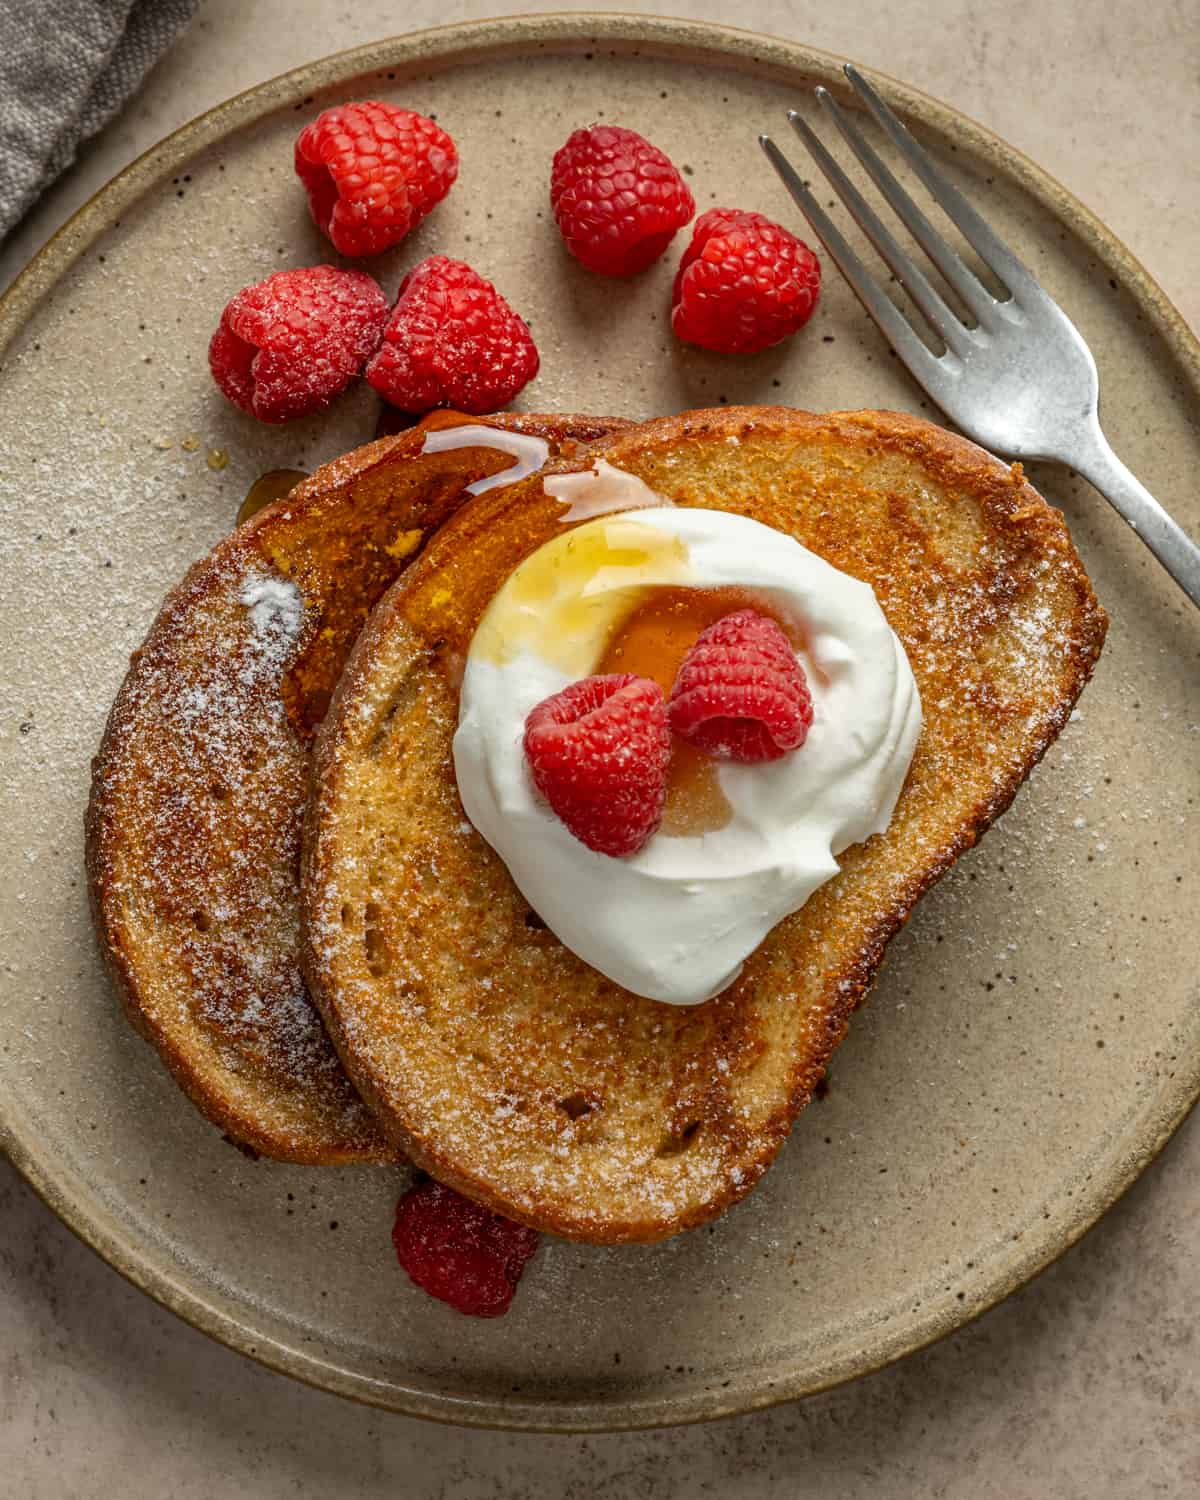 Overhead view of french toast with whipped topping, maple syrup and raspberries.